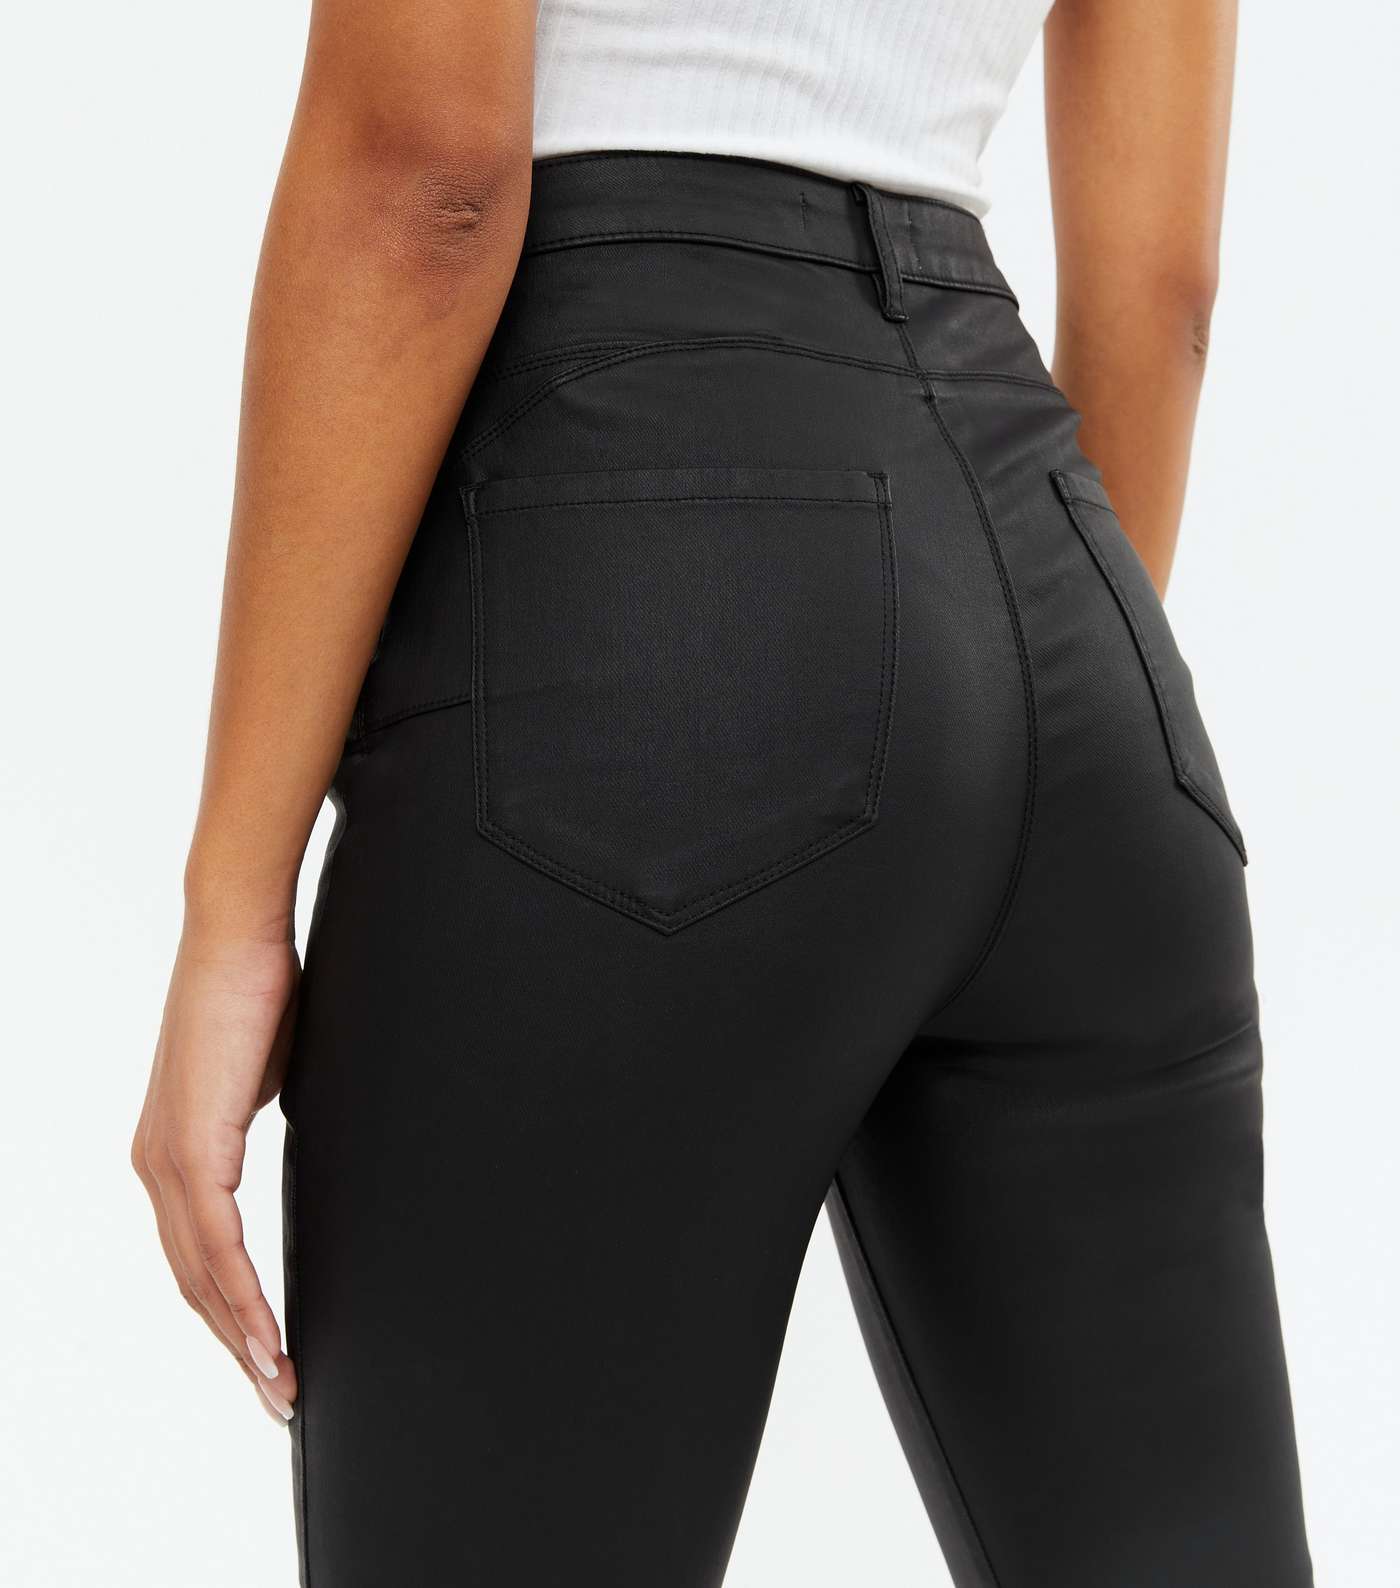 Urban Bliss Black Leather-Look Shaper Jeans Image 3